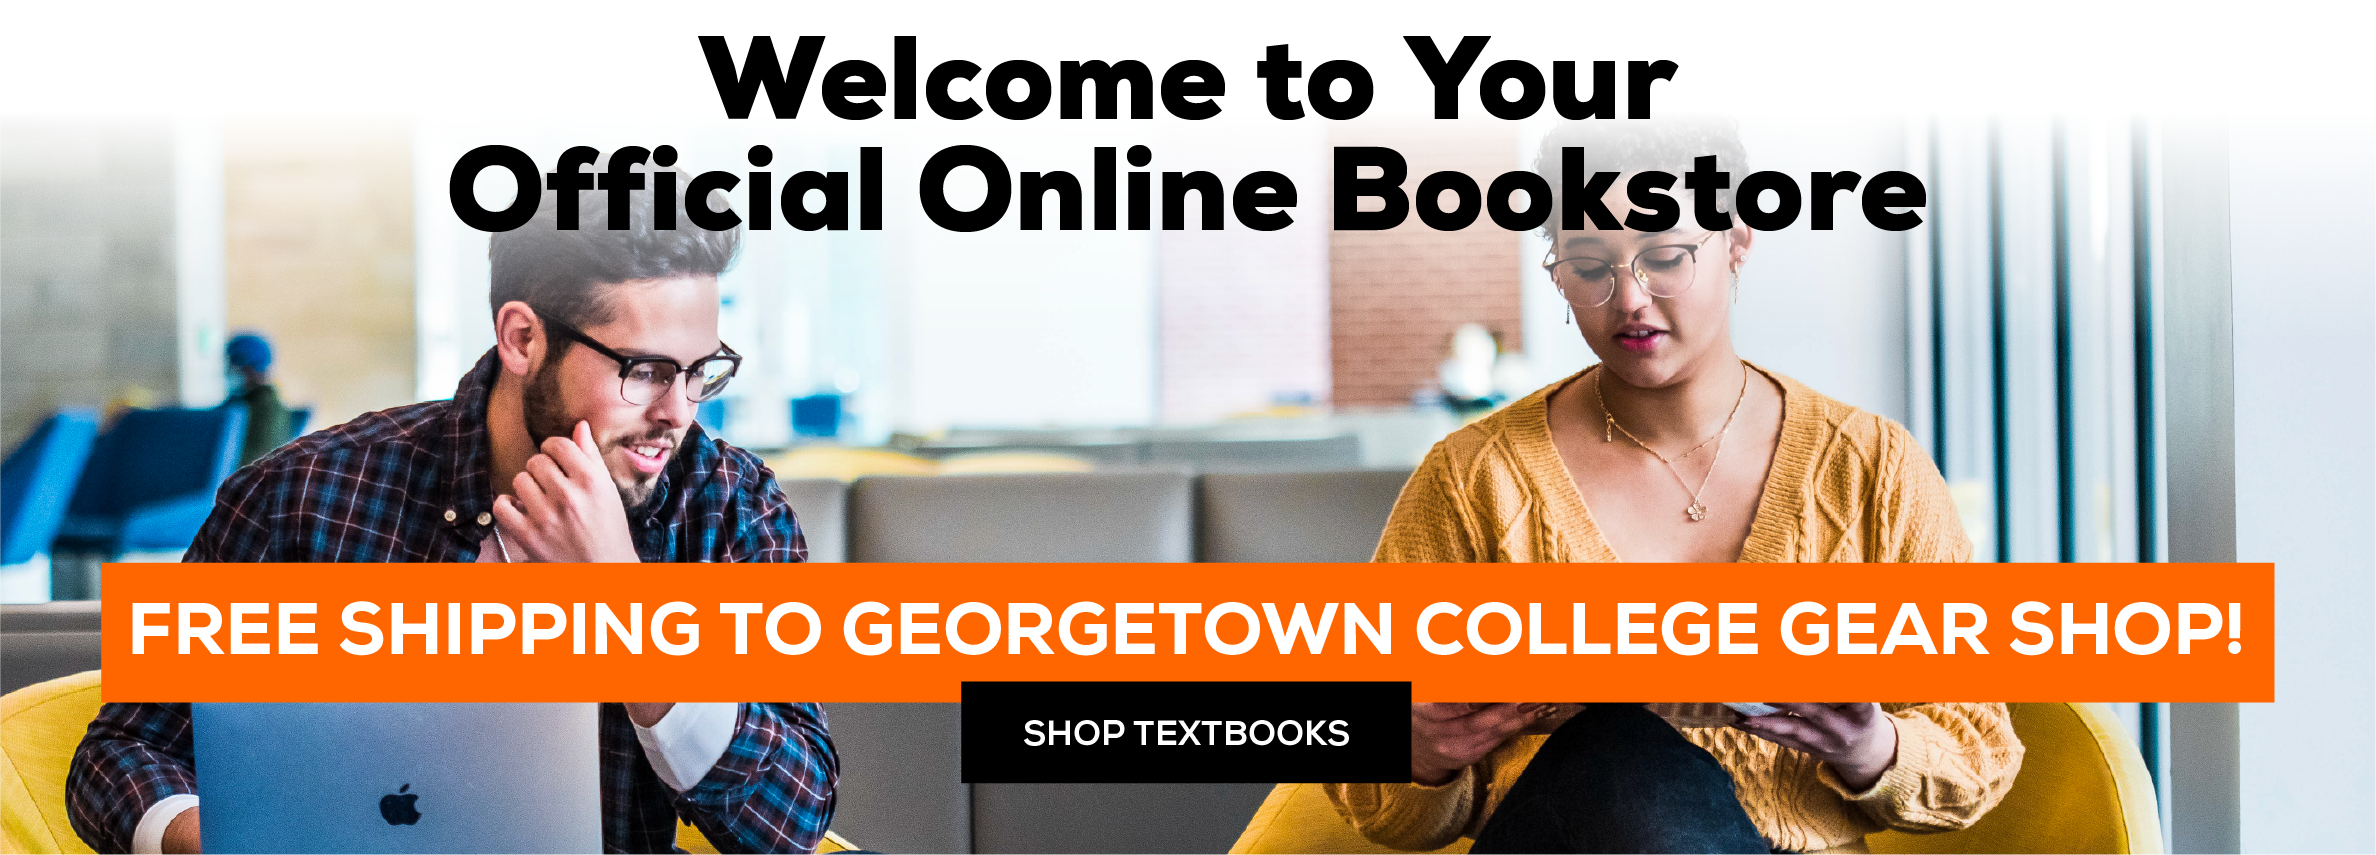 Welcome to your official online bookstore. Free shipping to Georgetown College Gear Shop. Shop Textbooks